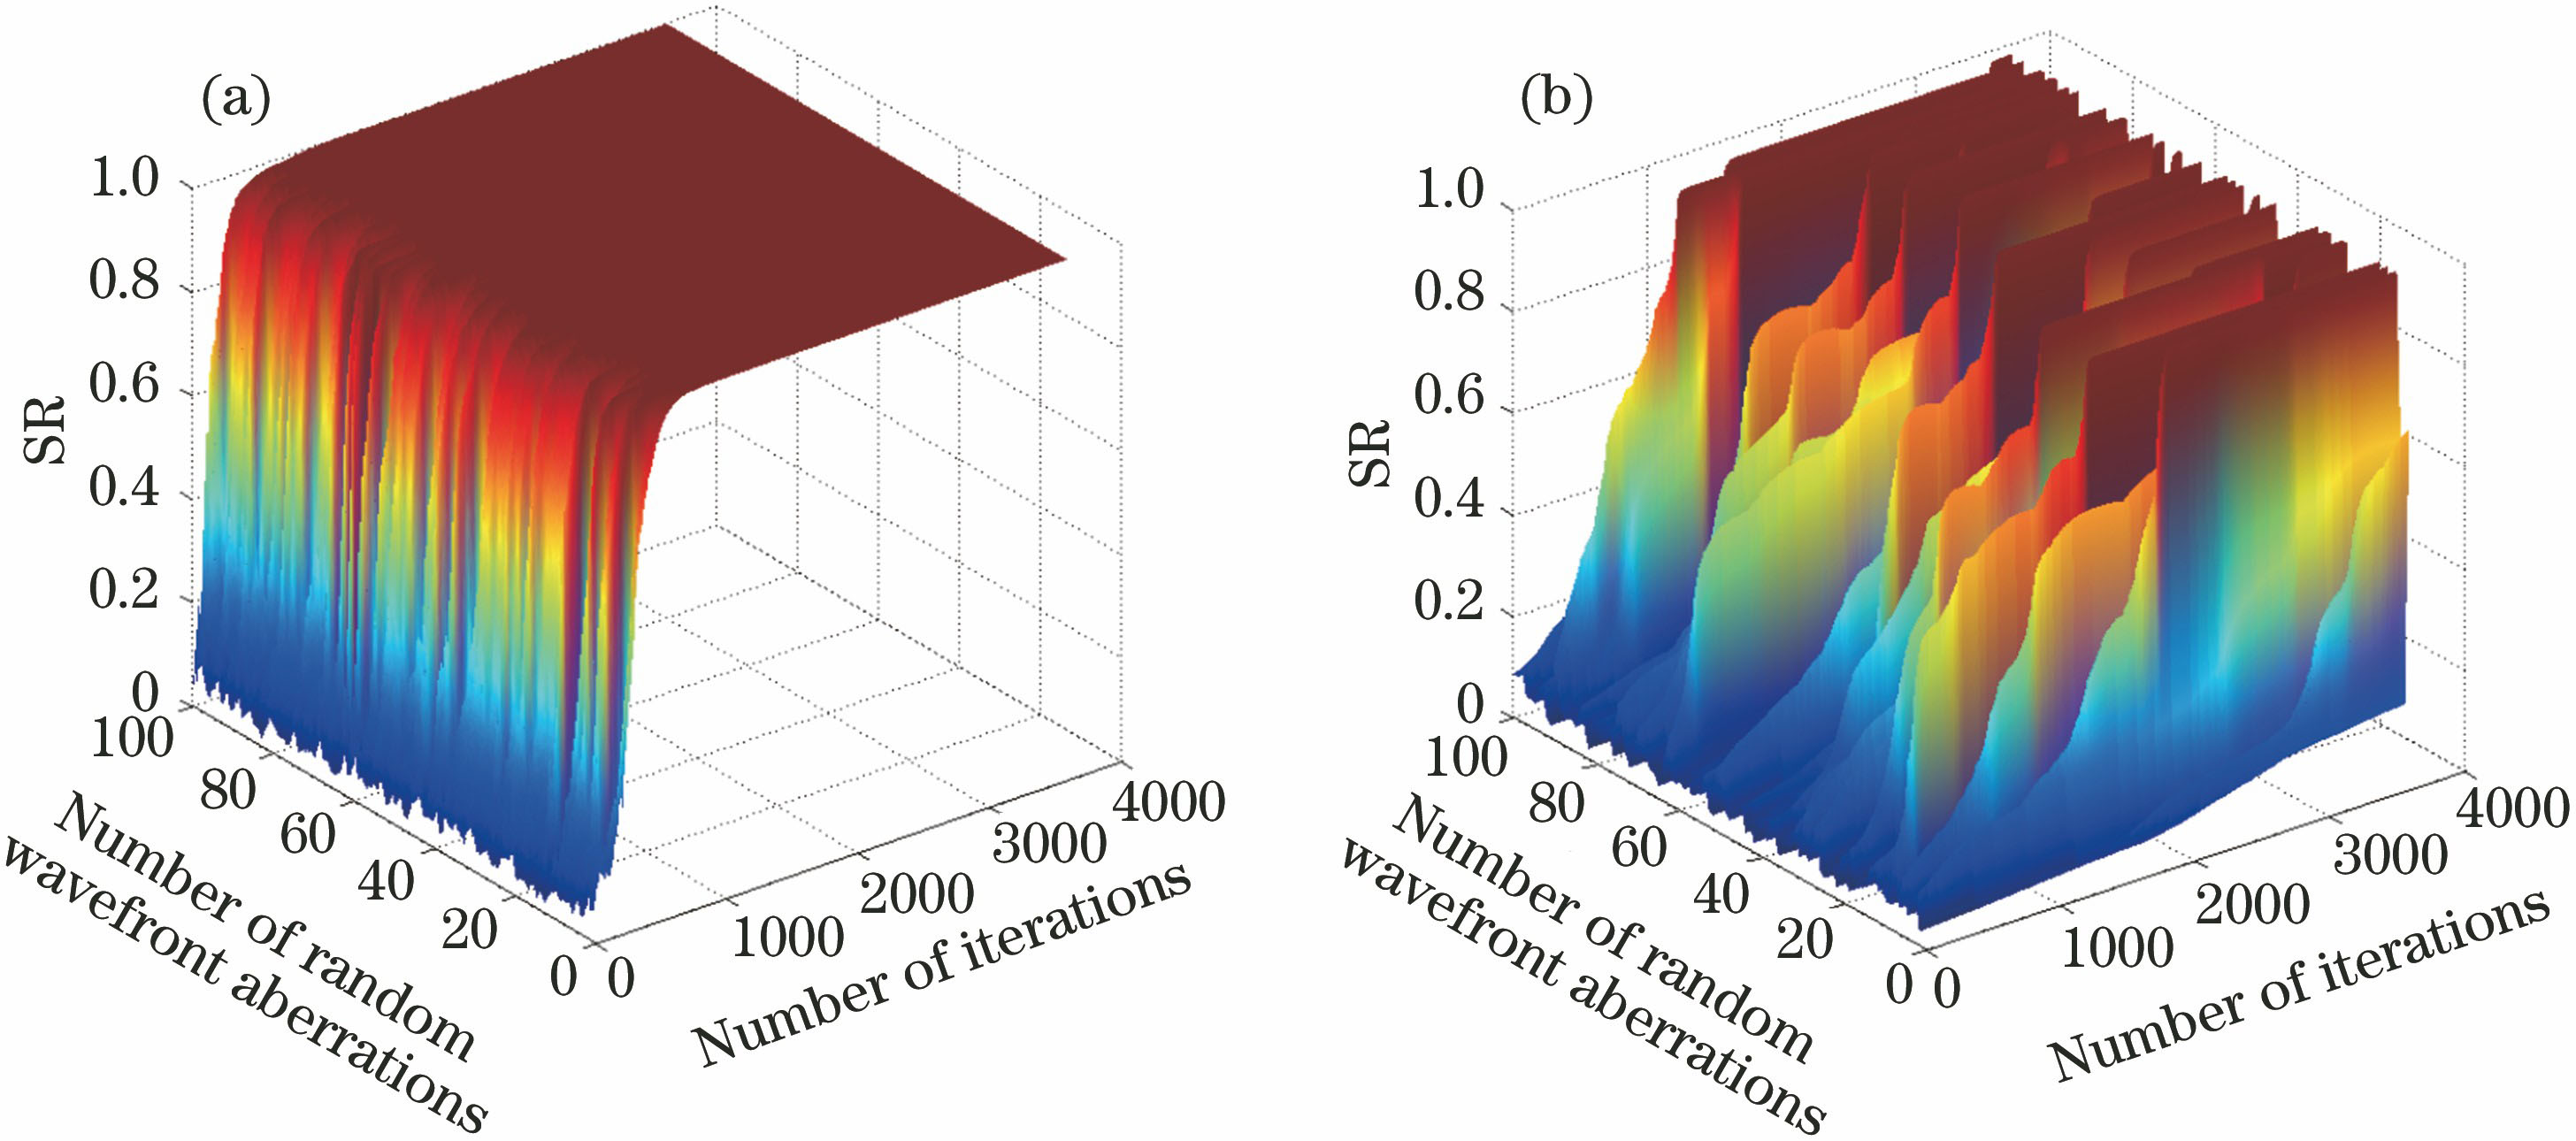 Convergence simulations of SPGD algorithm under 100 groups of random wavefront aberrations with D0/r0=2.5. (a) Results of SPGD algorithm based on M; (b) results of SPGD algorithm based on J